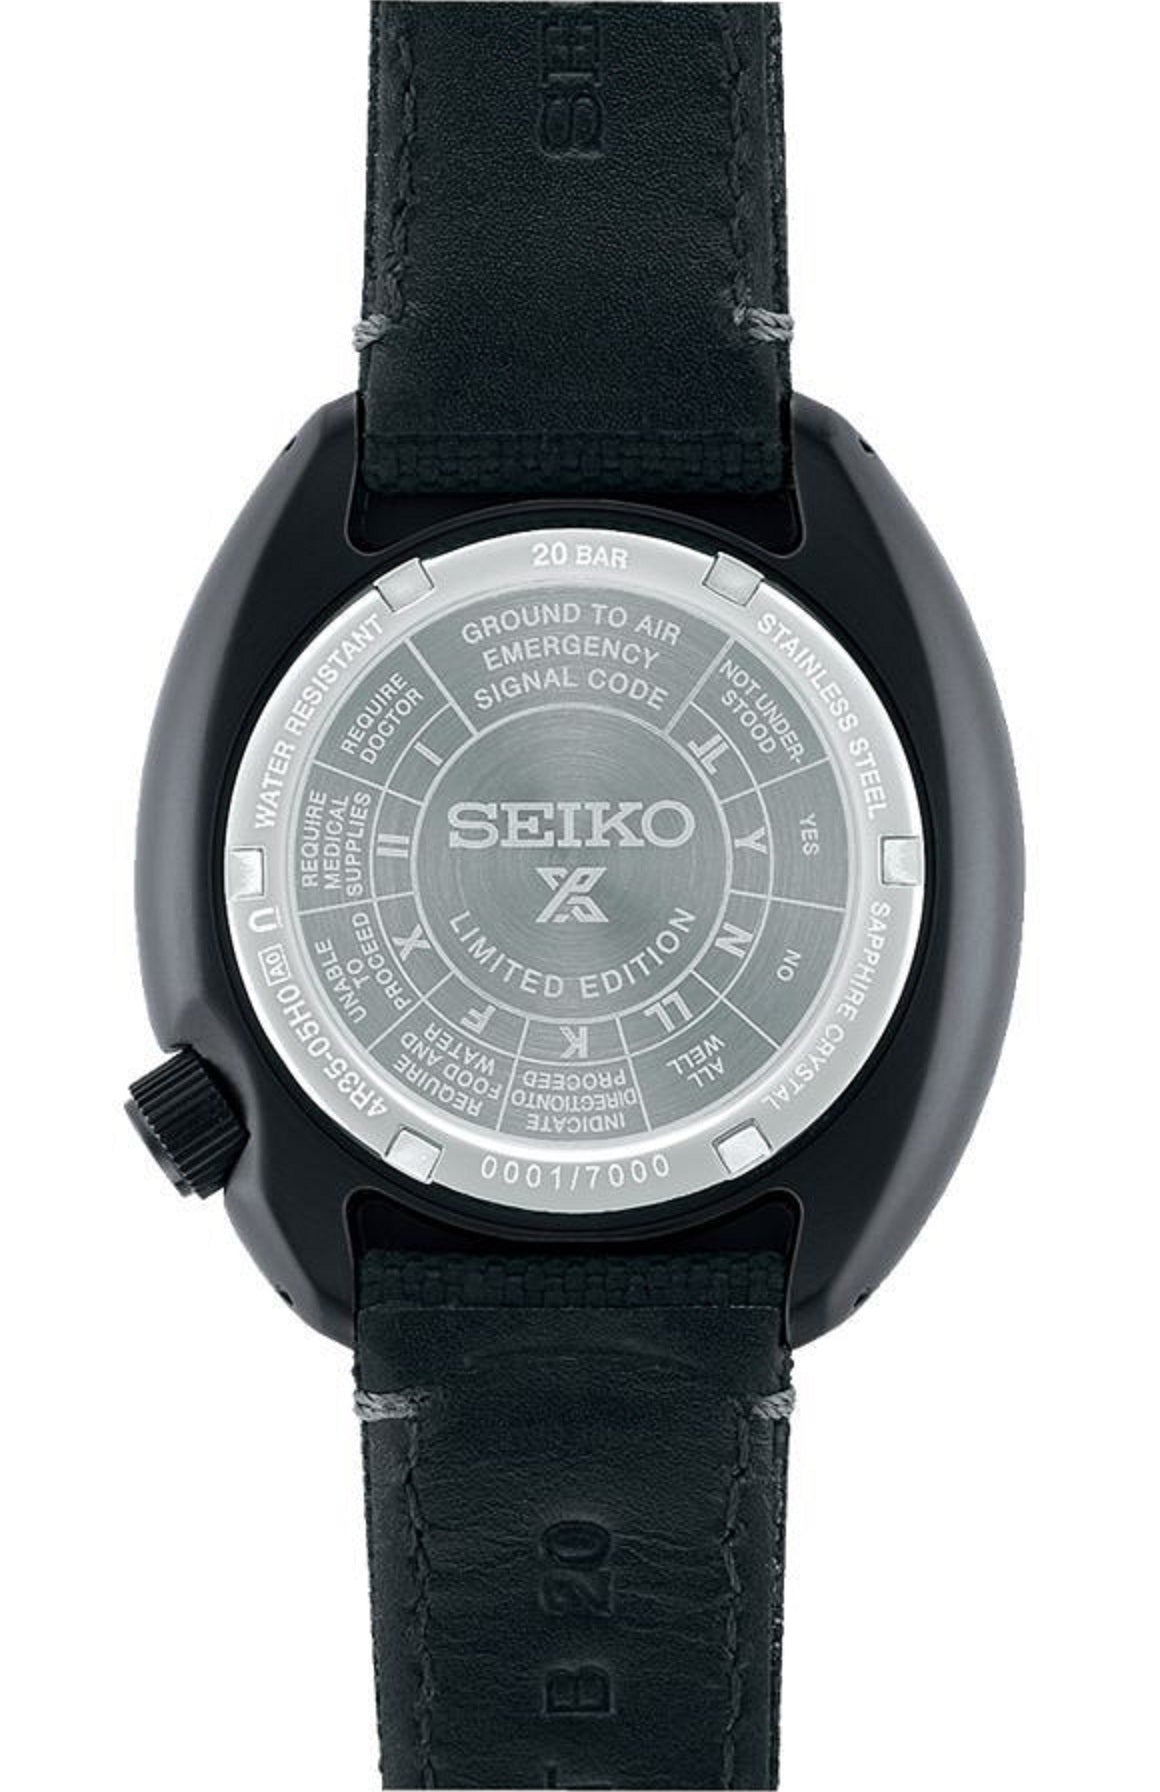 SEIKO SRPH99K1 Prospex The Black Series Limited Ed Automatic Watch for Men-Watch Portal Philippines